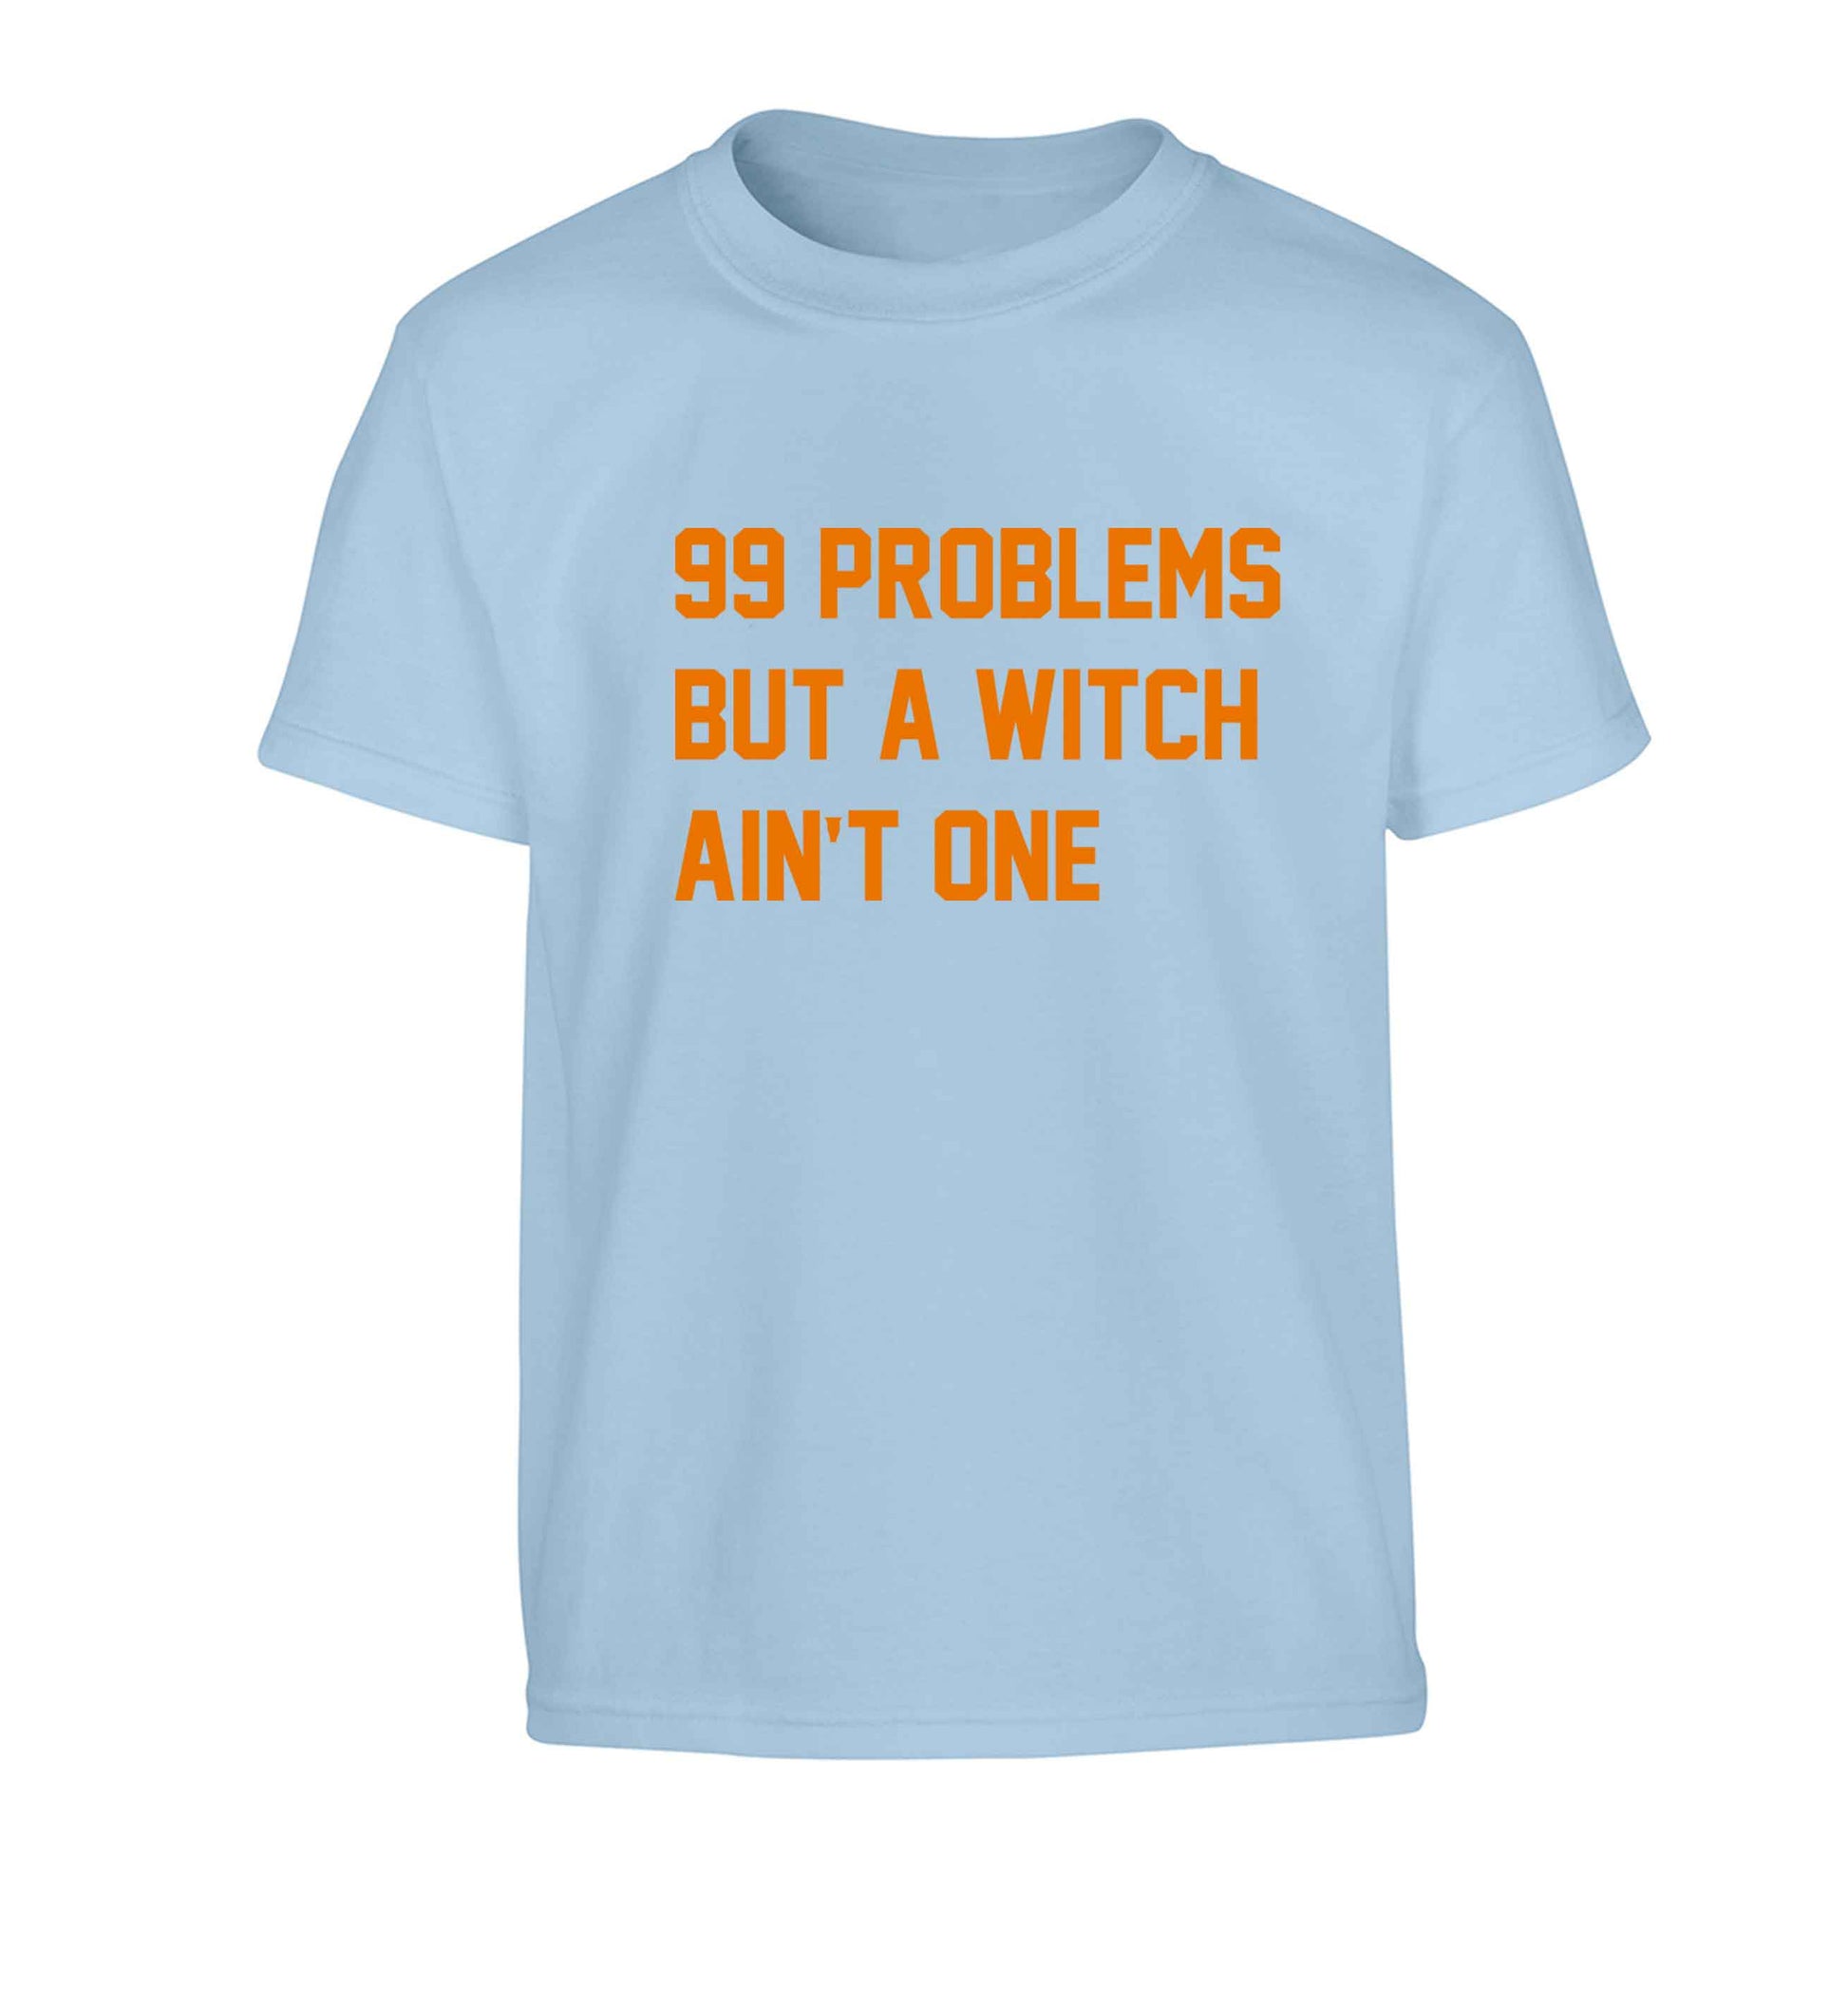 99 Problems but a witch aint one Children's light blue Tshirt 12-13 Years